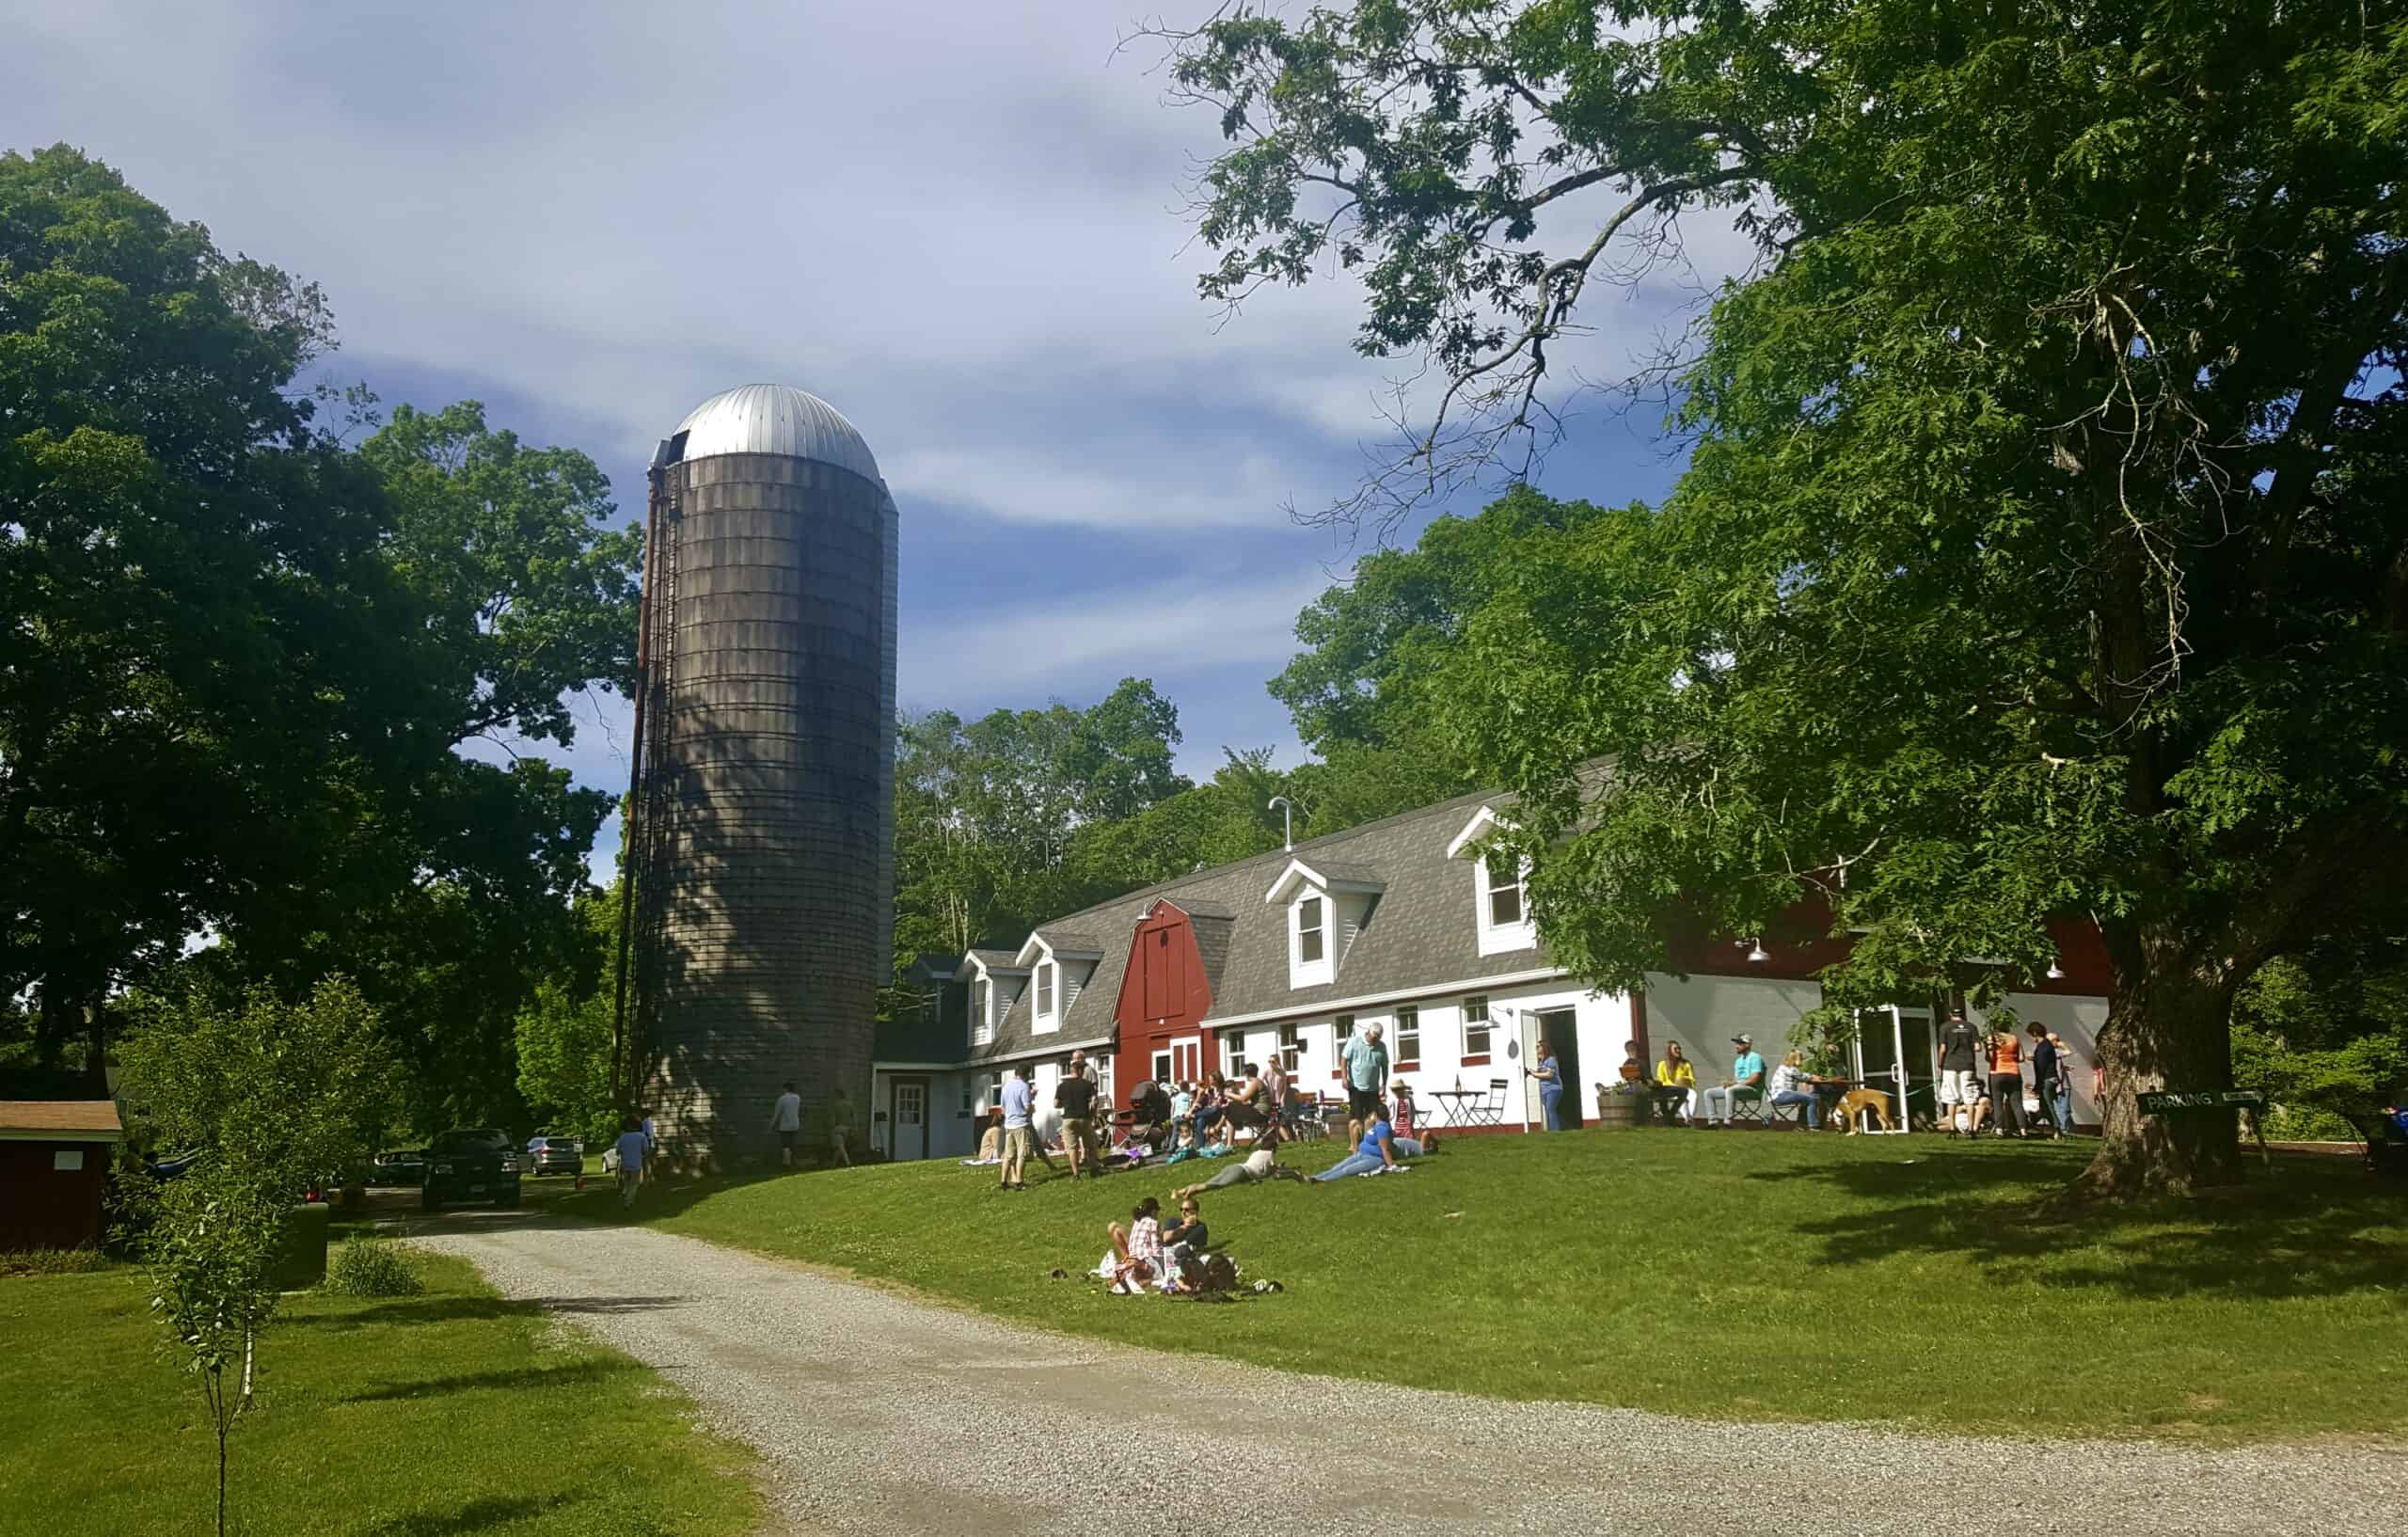 A craft brewery in Connecticut is located in the country on a sunny day with people sitting on the green grass, surrounded by trees